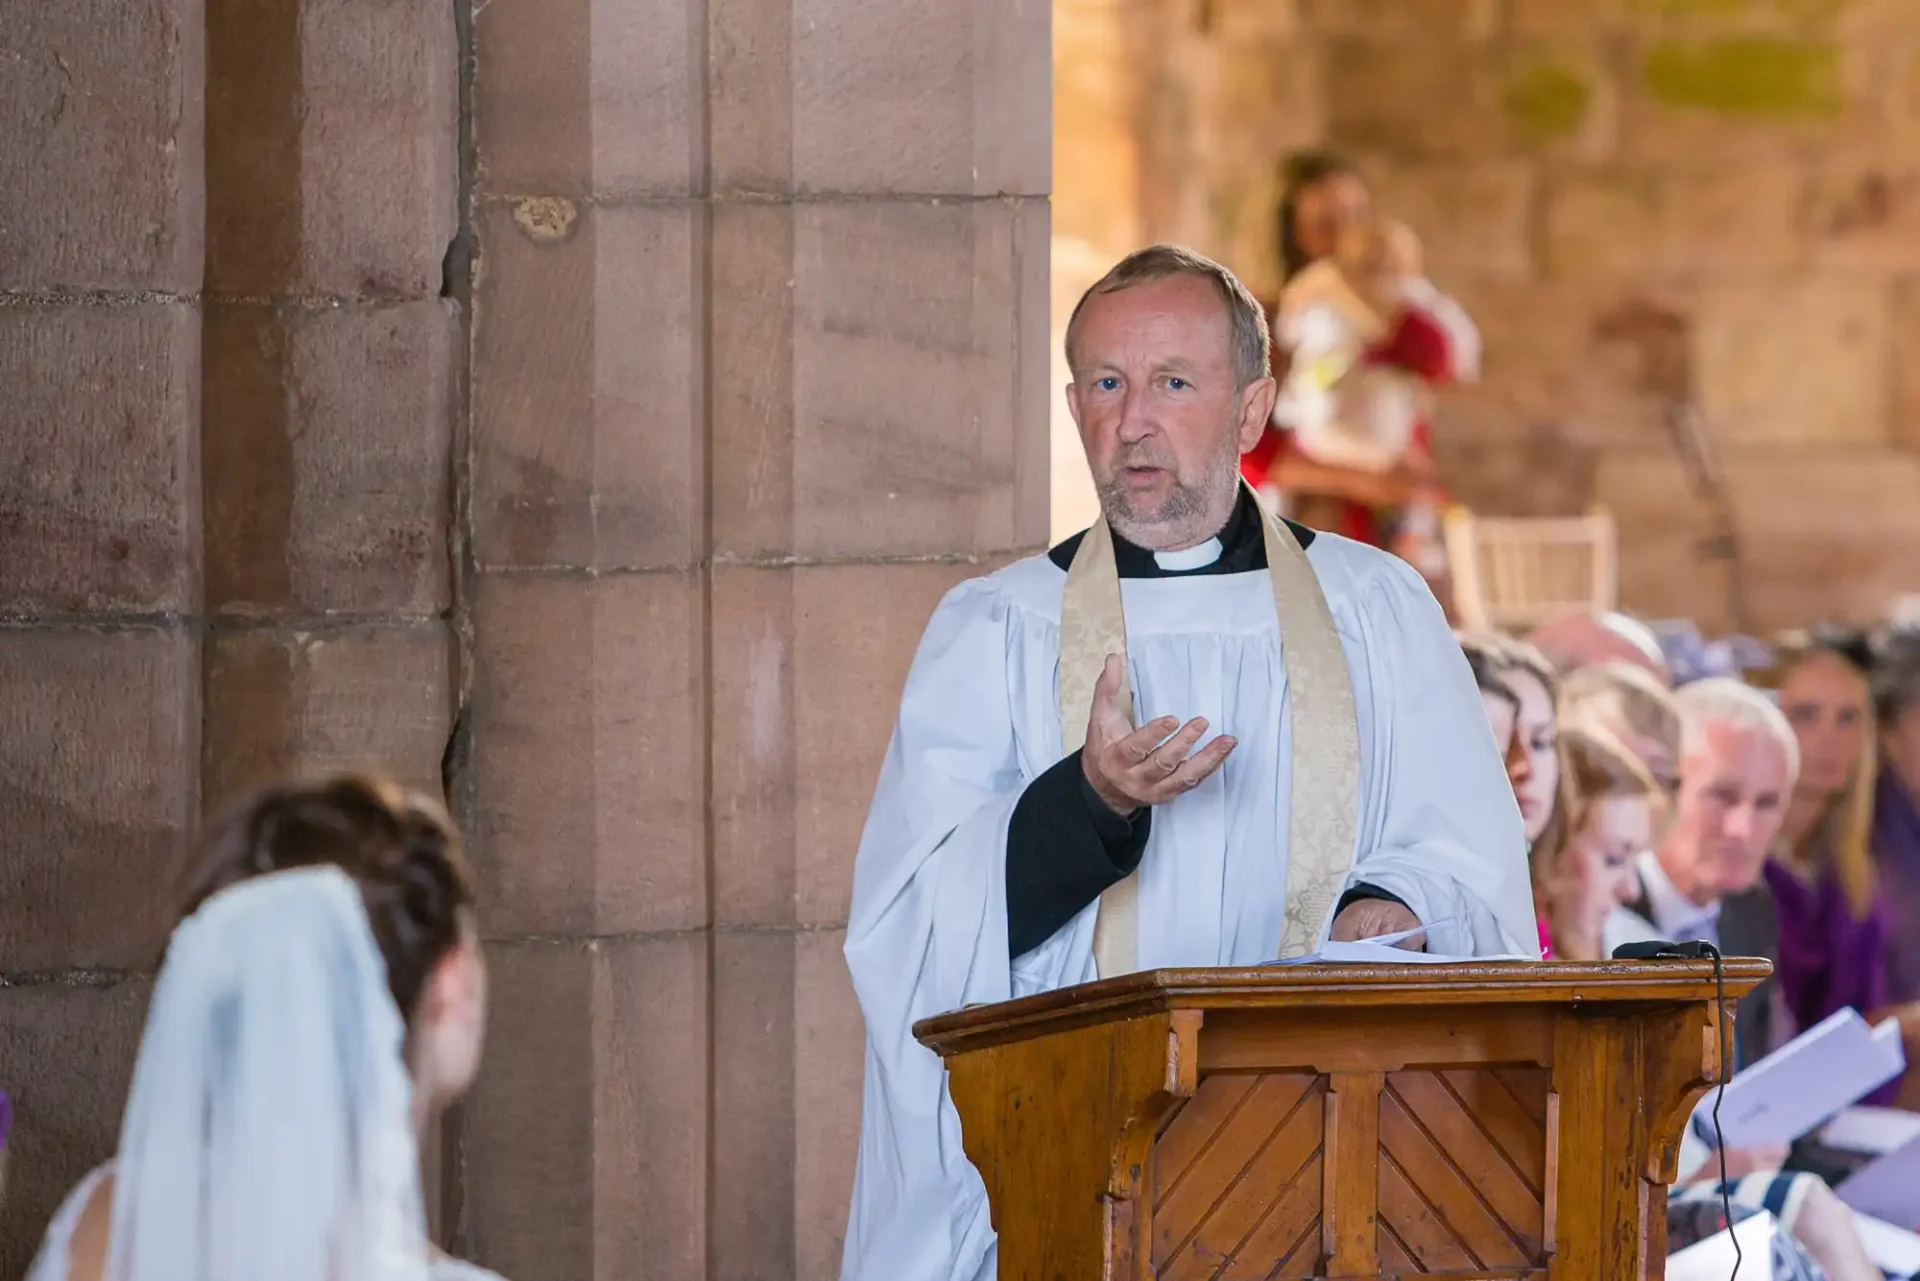 A priest in white robes delivering a sermon from a wooden pulpit in a church, with listeners in the background.